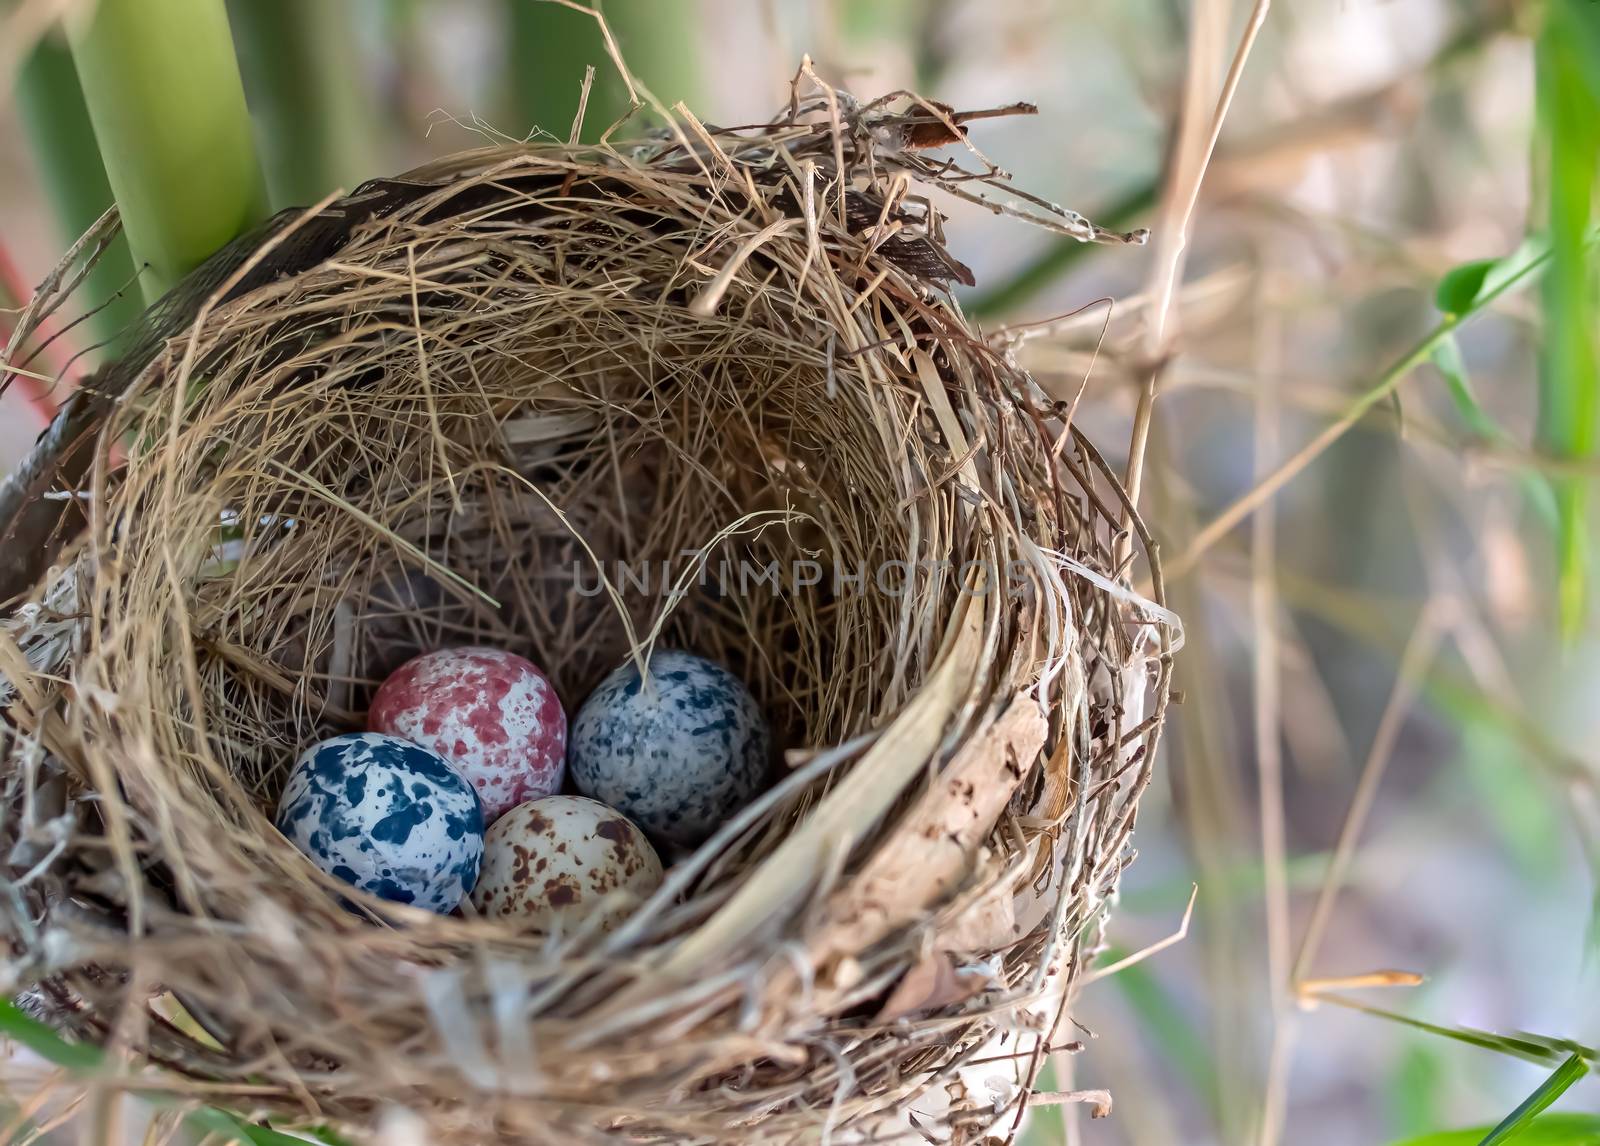 A bird nest in the bamboo tree with four colorful eggs.